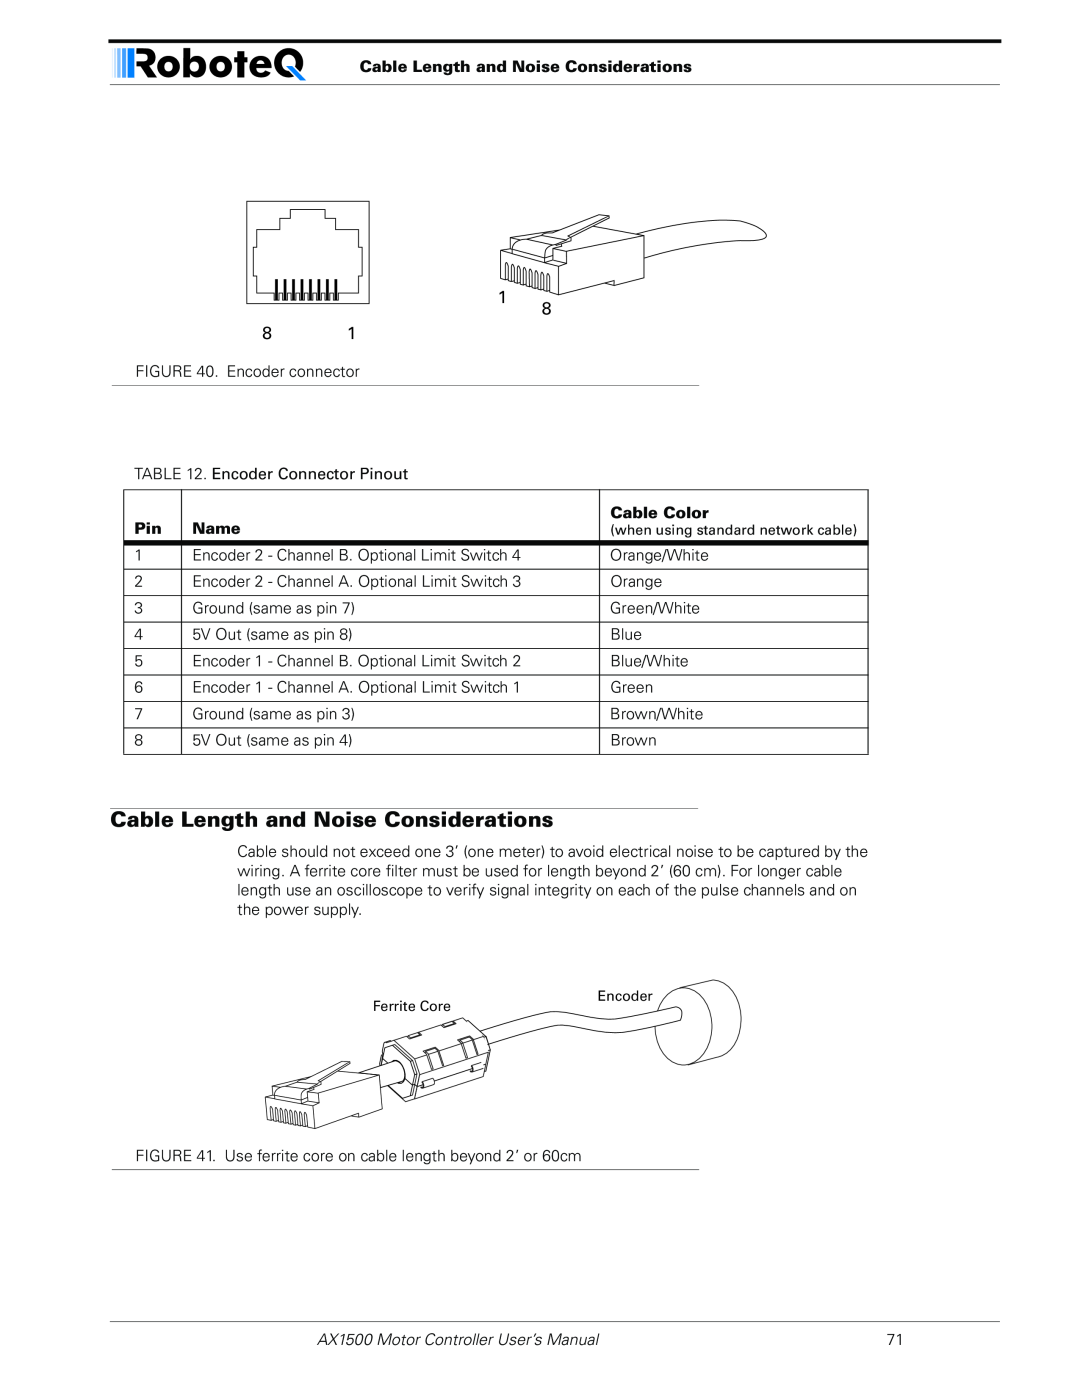 RoboteQ AX2550 Cable Length and Noise Considerations, Name, Cable Color, AX1500 Motor Controller User’s Manual 